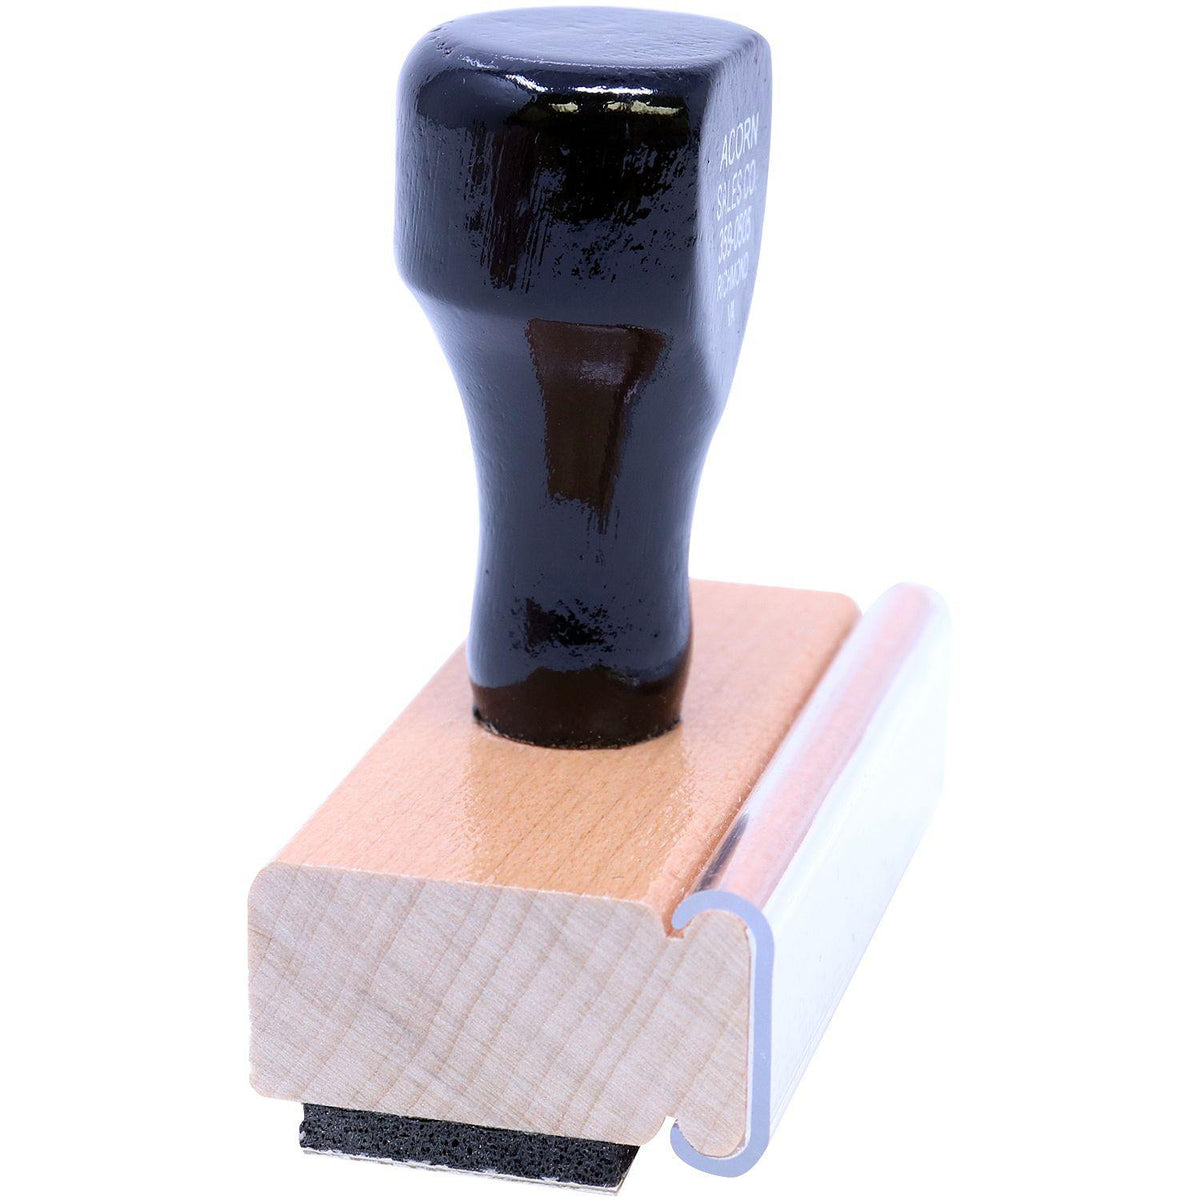 Side View of Coumadin Patient Rubber Stamp at an Angle